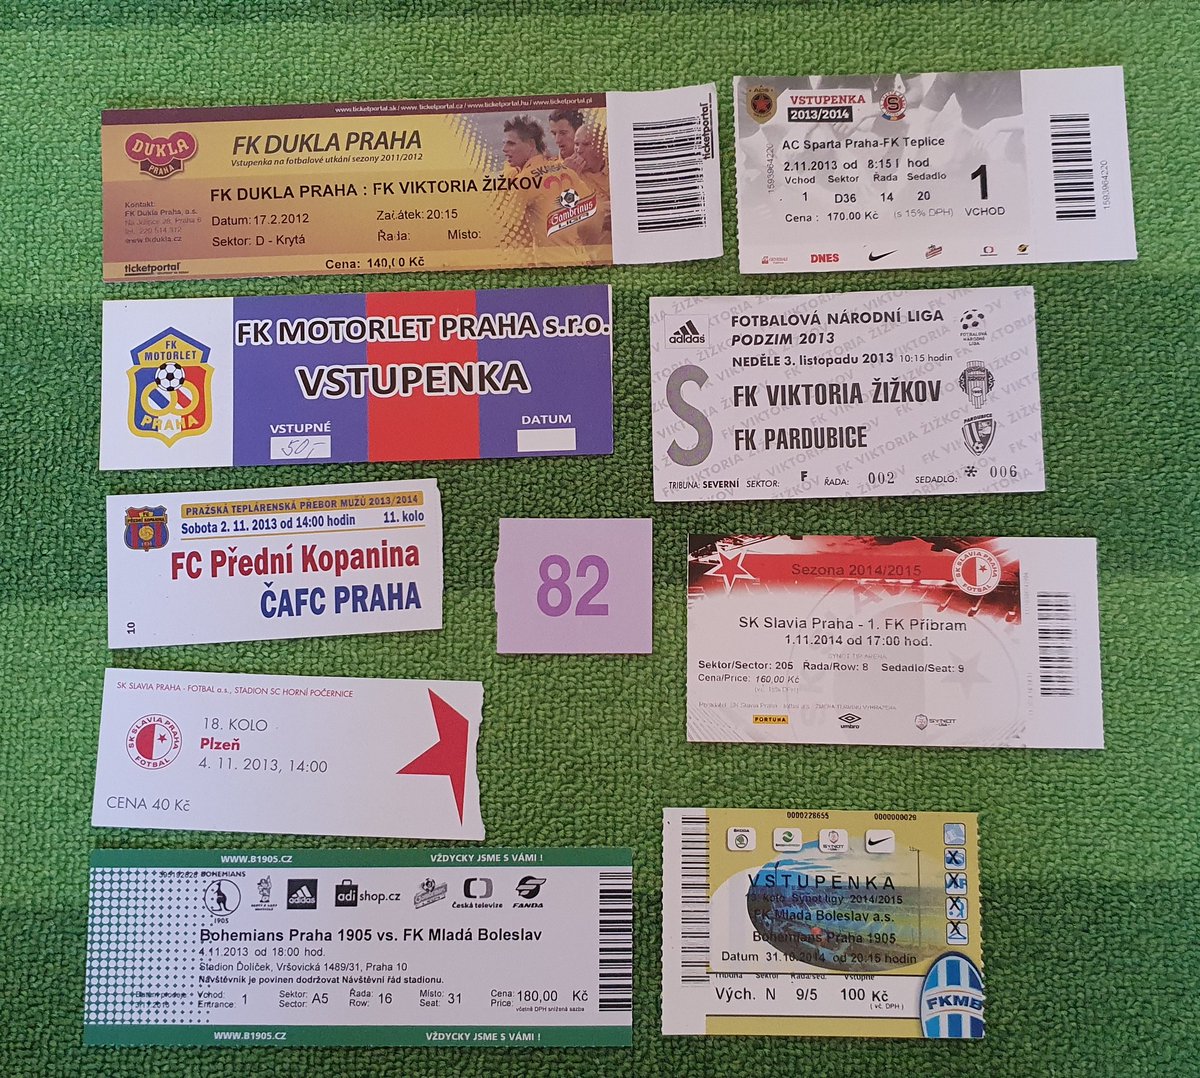 Tickets from my matches in The Netherlands, USA, The Czech Republic as well as a couple from Italy, Spain, Belgium & Scotland. 